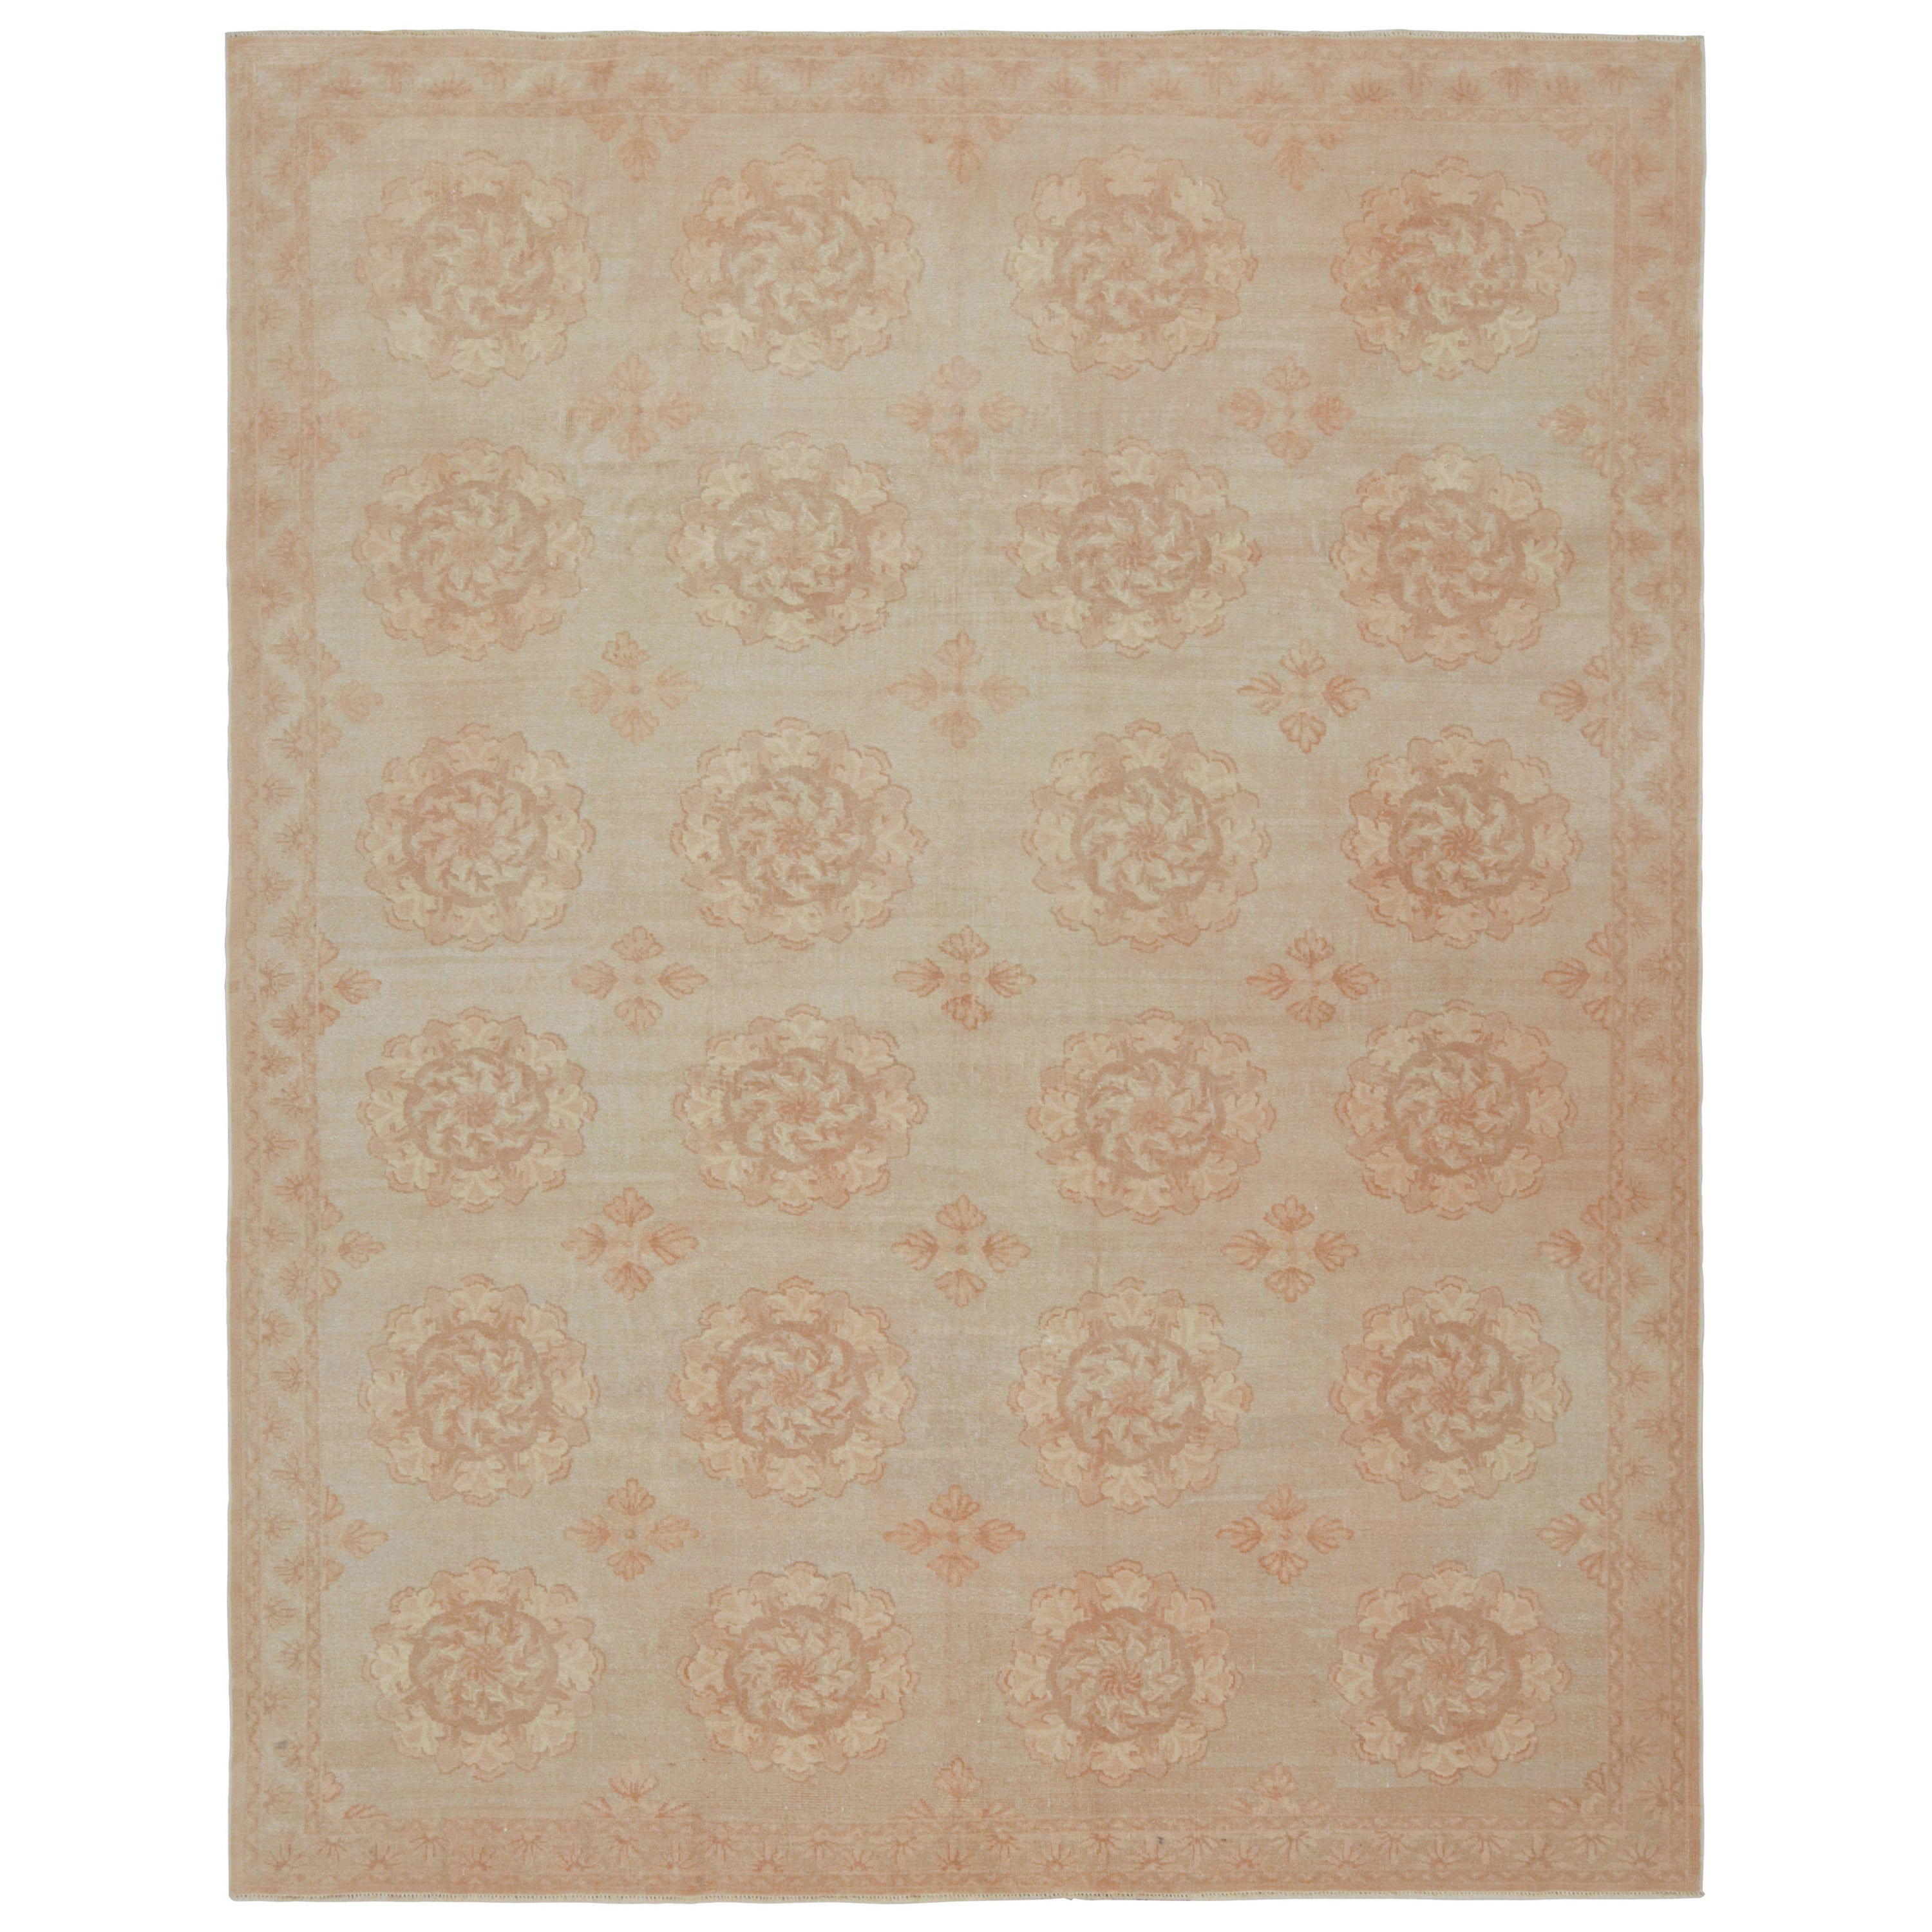 Rug & Kilim’s Contemporary European Style Rug with Beige-Brown Floral Medallions